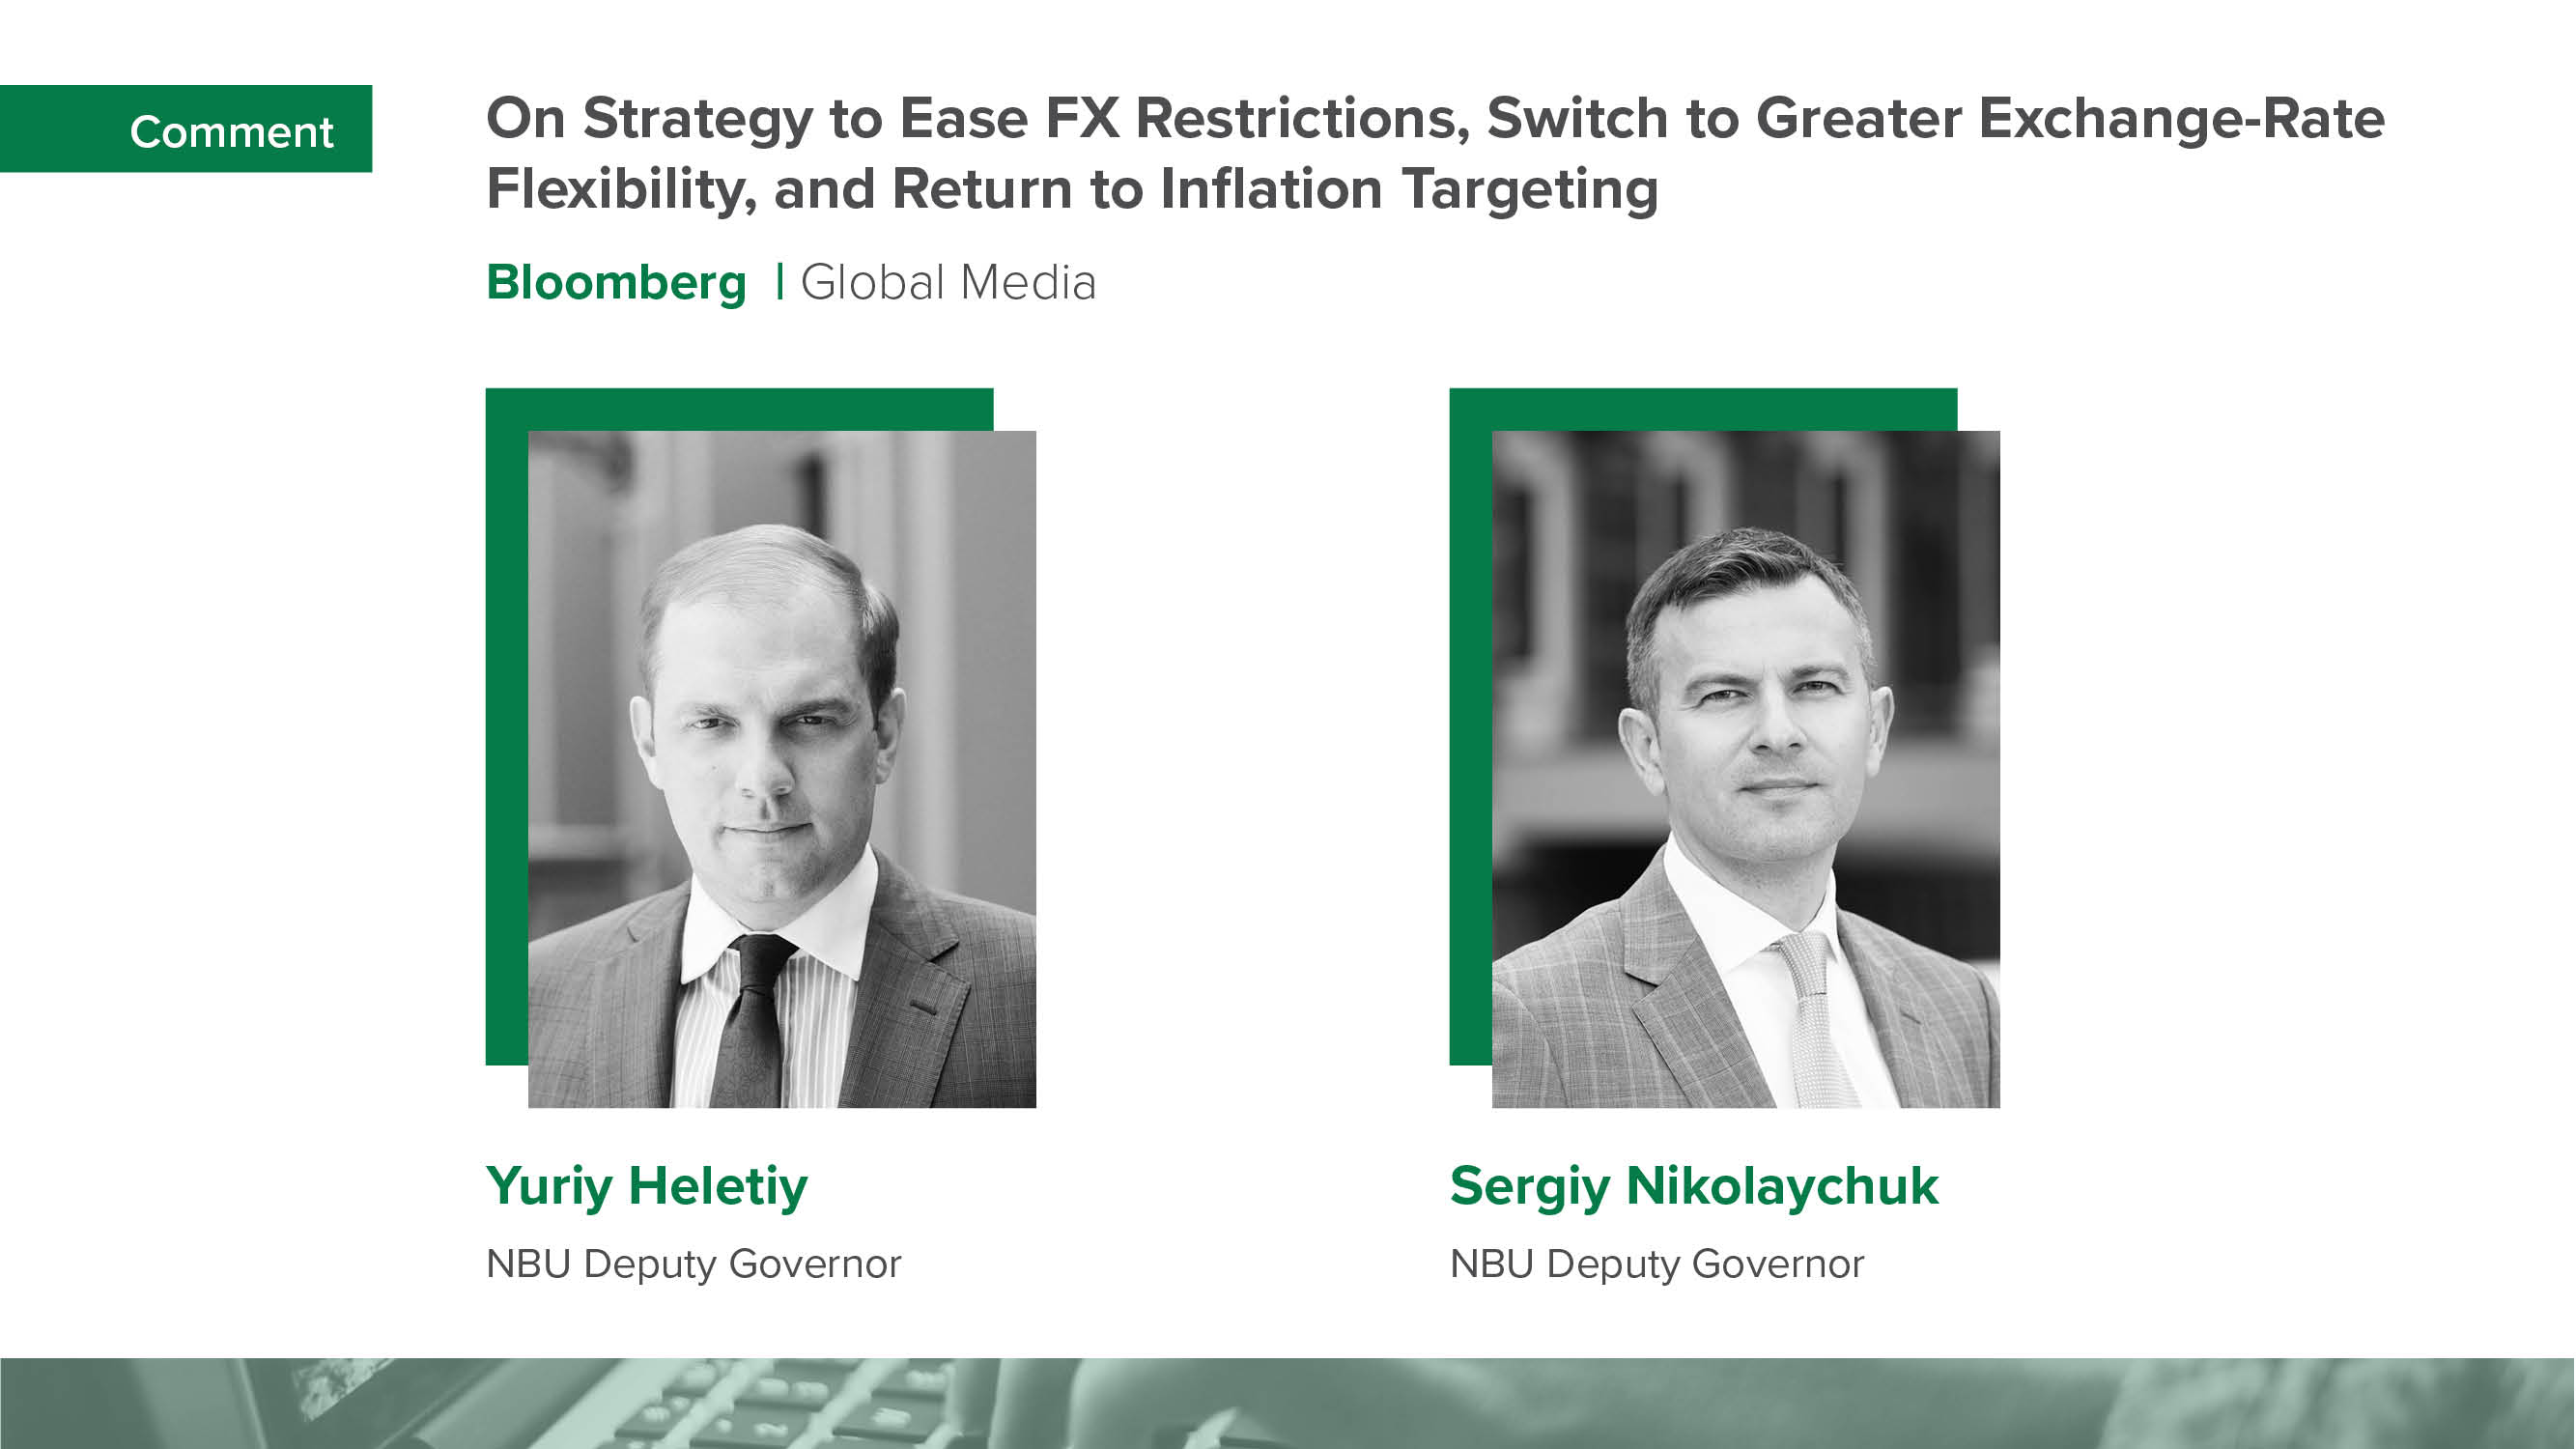 Sergiy Nikolaychuk’s and Yuriy Heletiy’s comment for Bloomberg about the strategy for easing FX restrictions, transitioning to greater exchange-rate flexibility, and returning to inflation targeting